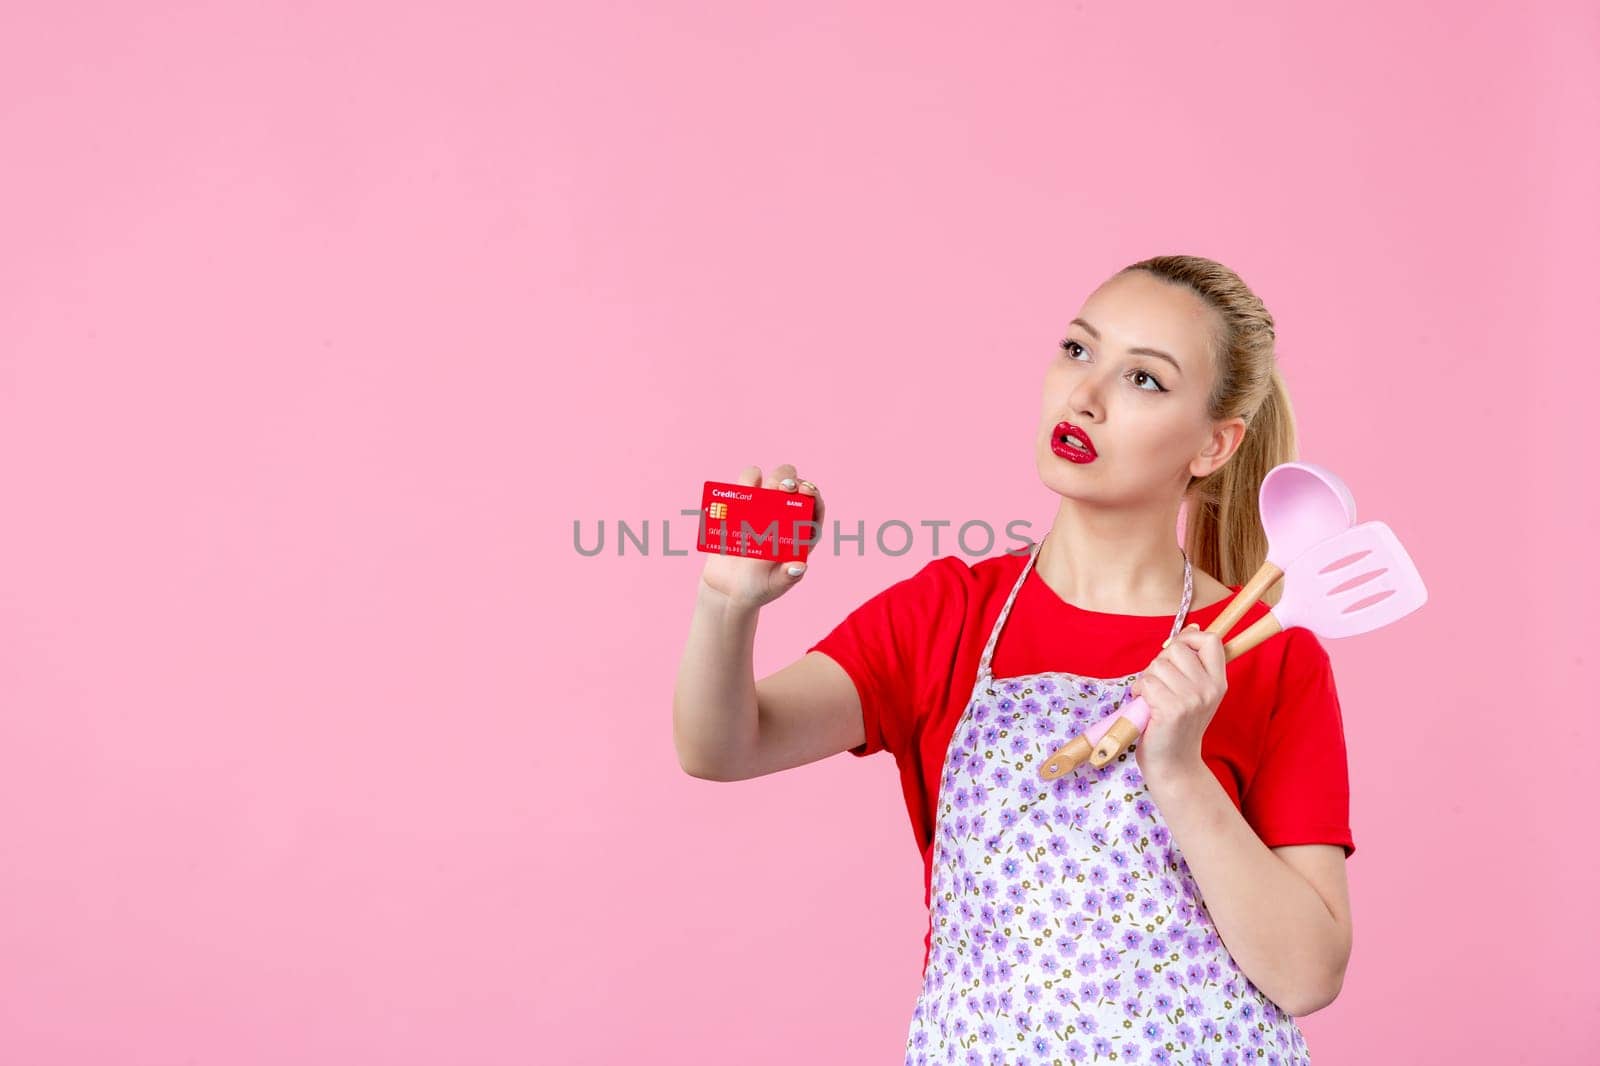 front view young housewife in cape holding spoons and bank card on pink background profession occupation duty money wife uniform cutlery worker horizontal